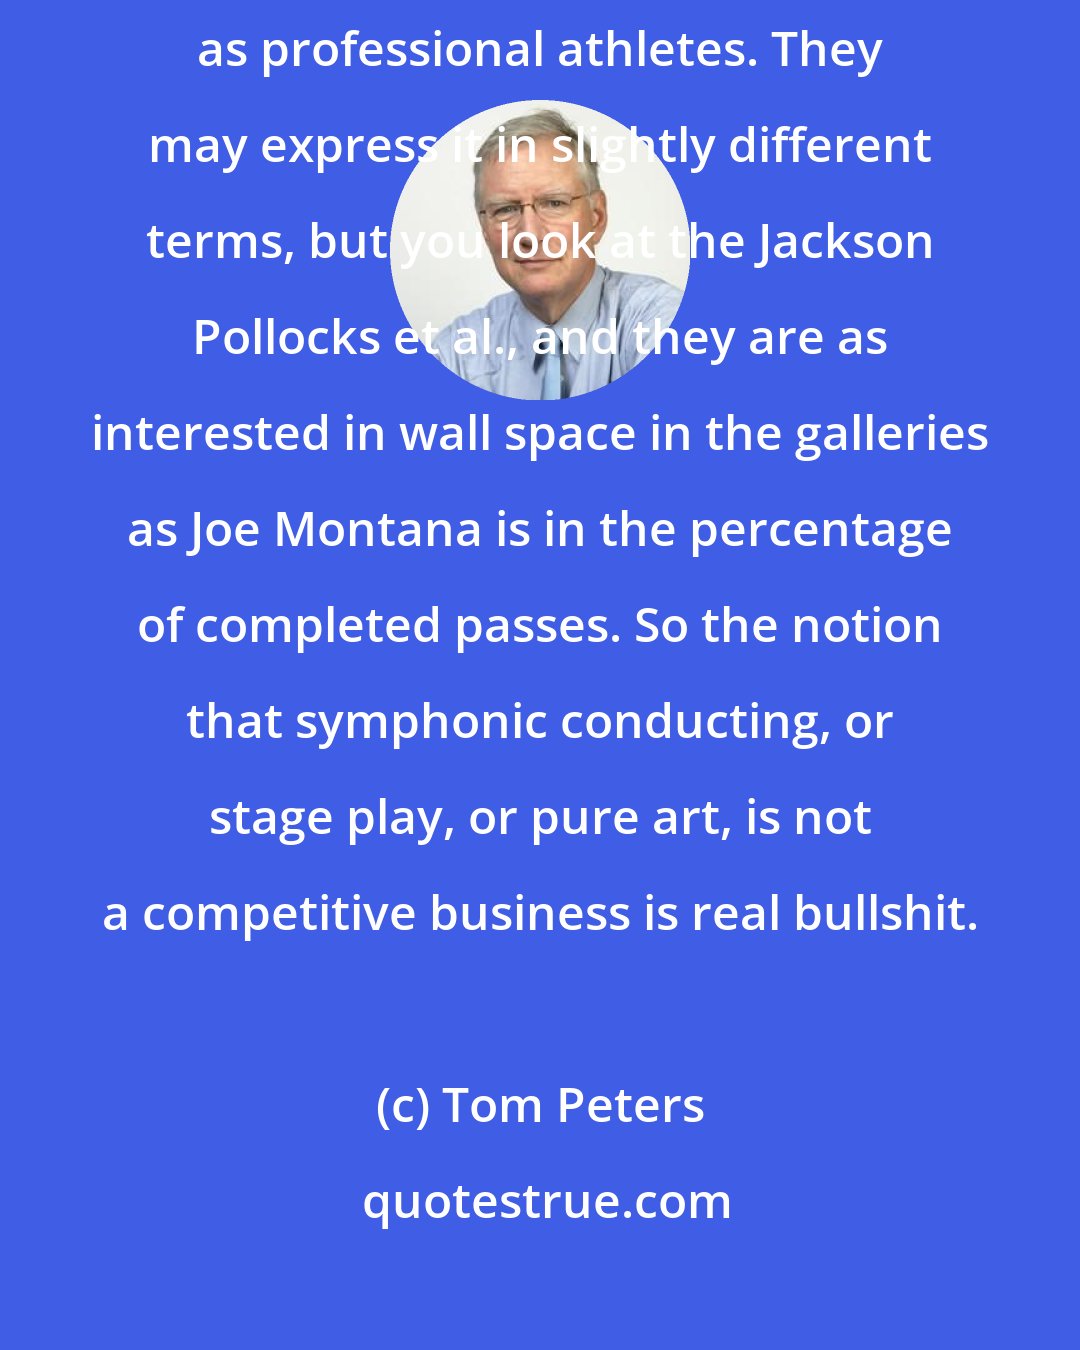 Tom Peters: The 10 or 12 artists I have known really well all my life are at least as competitive as professional athletes. They may express it in slightly different terms, but you look at the Jackson Pollocks et al., and they are as interested in wall space in the galleries as Joe Montana is in the percentage of completed passes. So the notion that symphonic conducting, or stage play, or pure art, is not a competitive business is real bullshit.